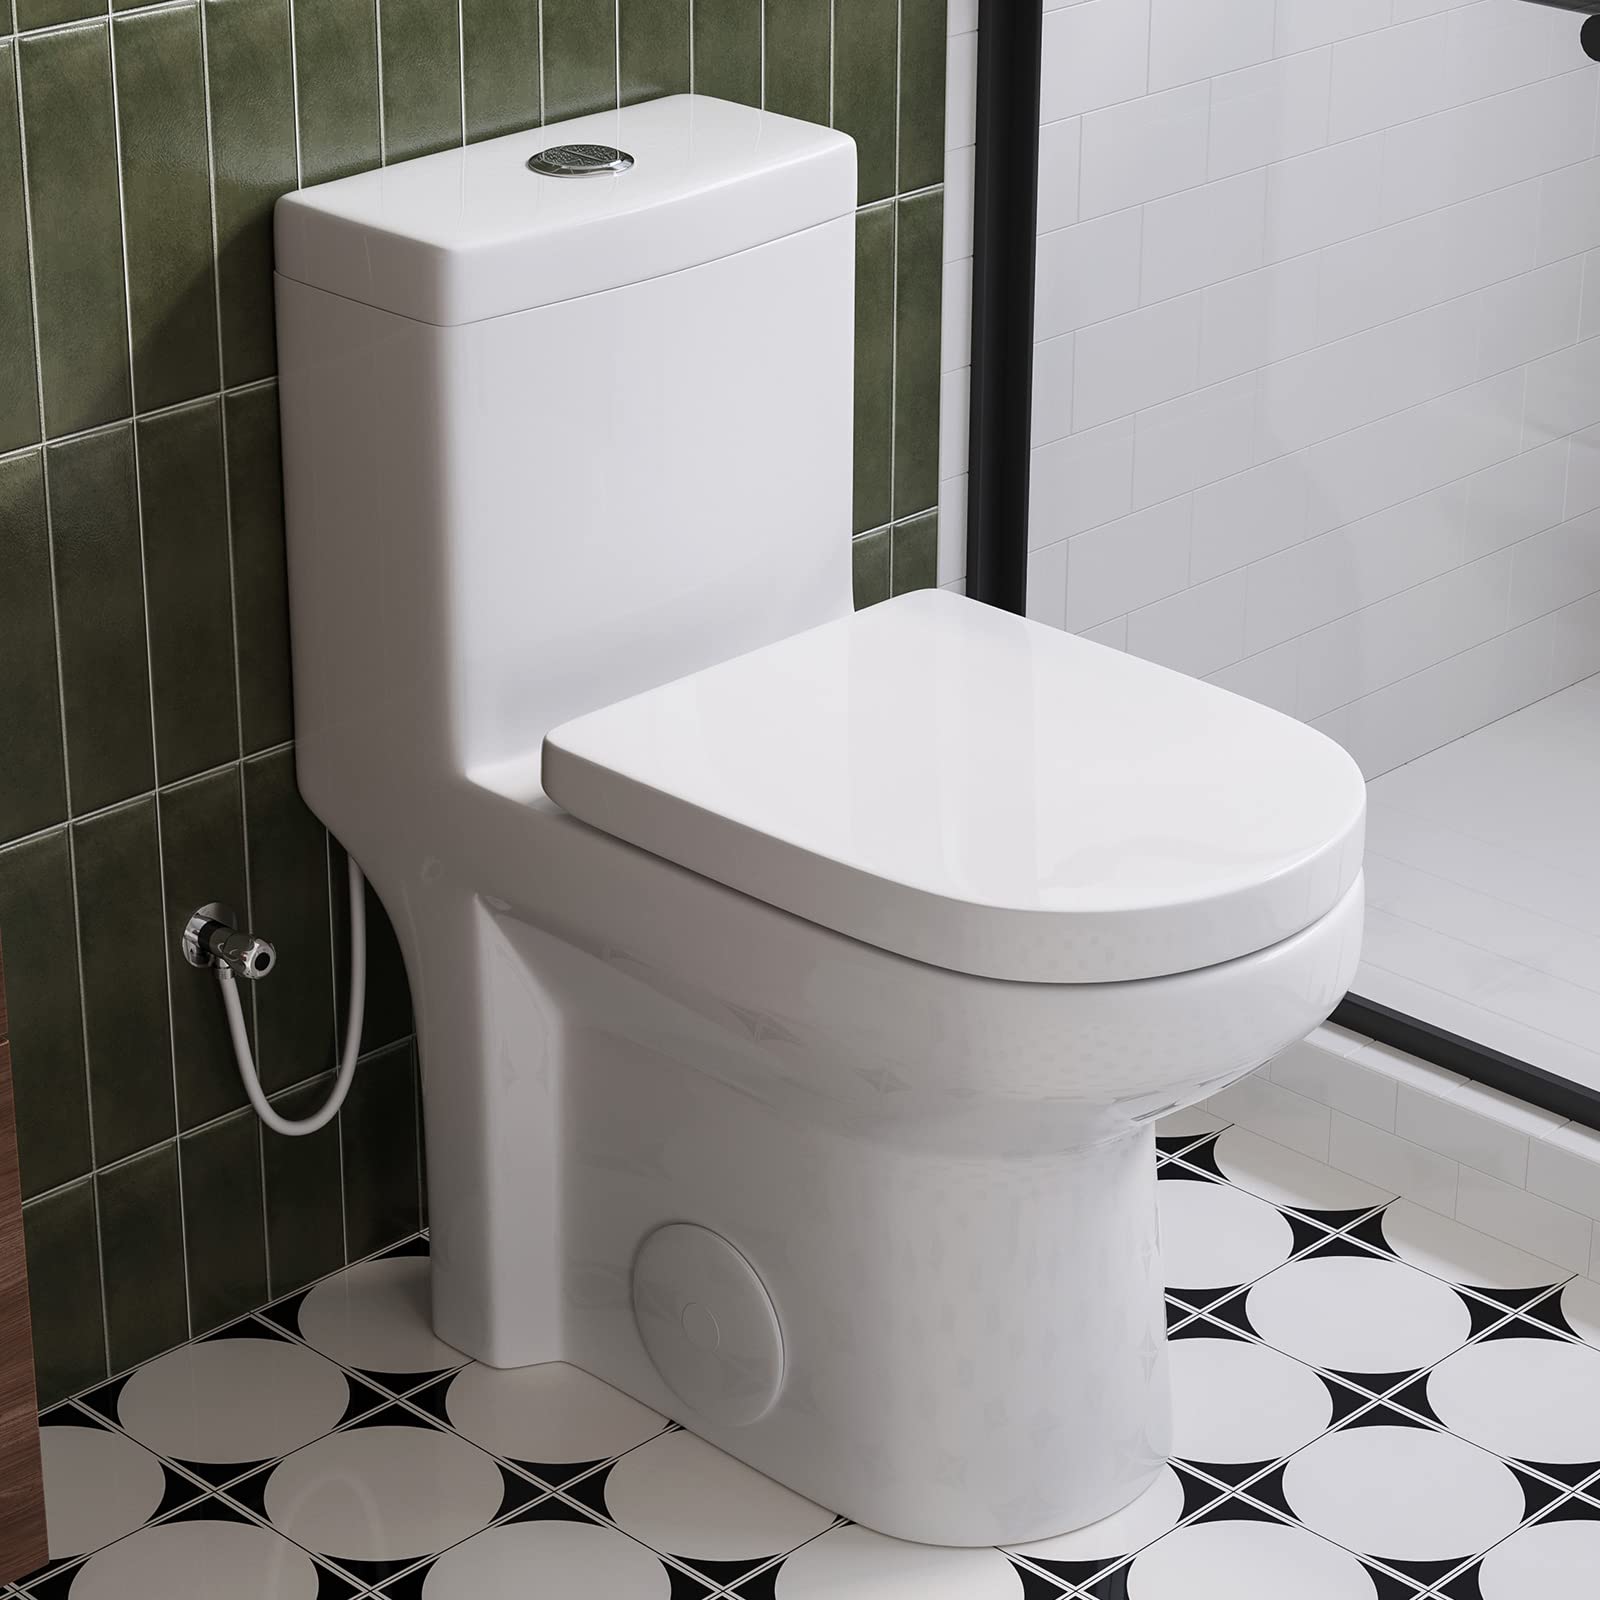 HOROW HWMT-8733U Small Compact One Piece Toilet